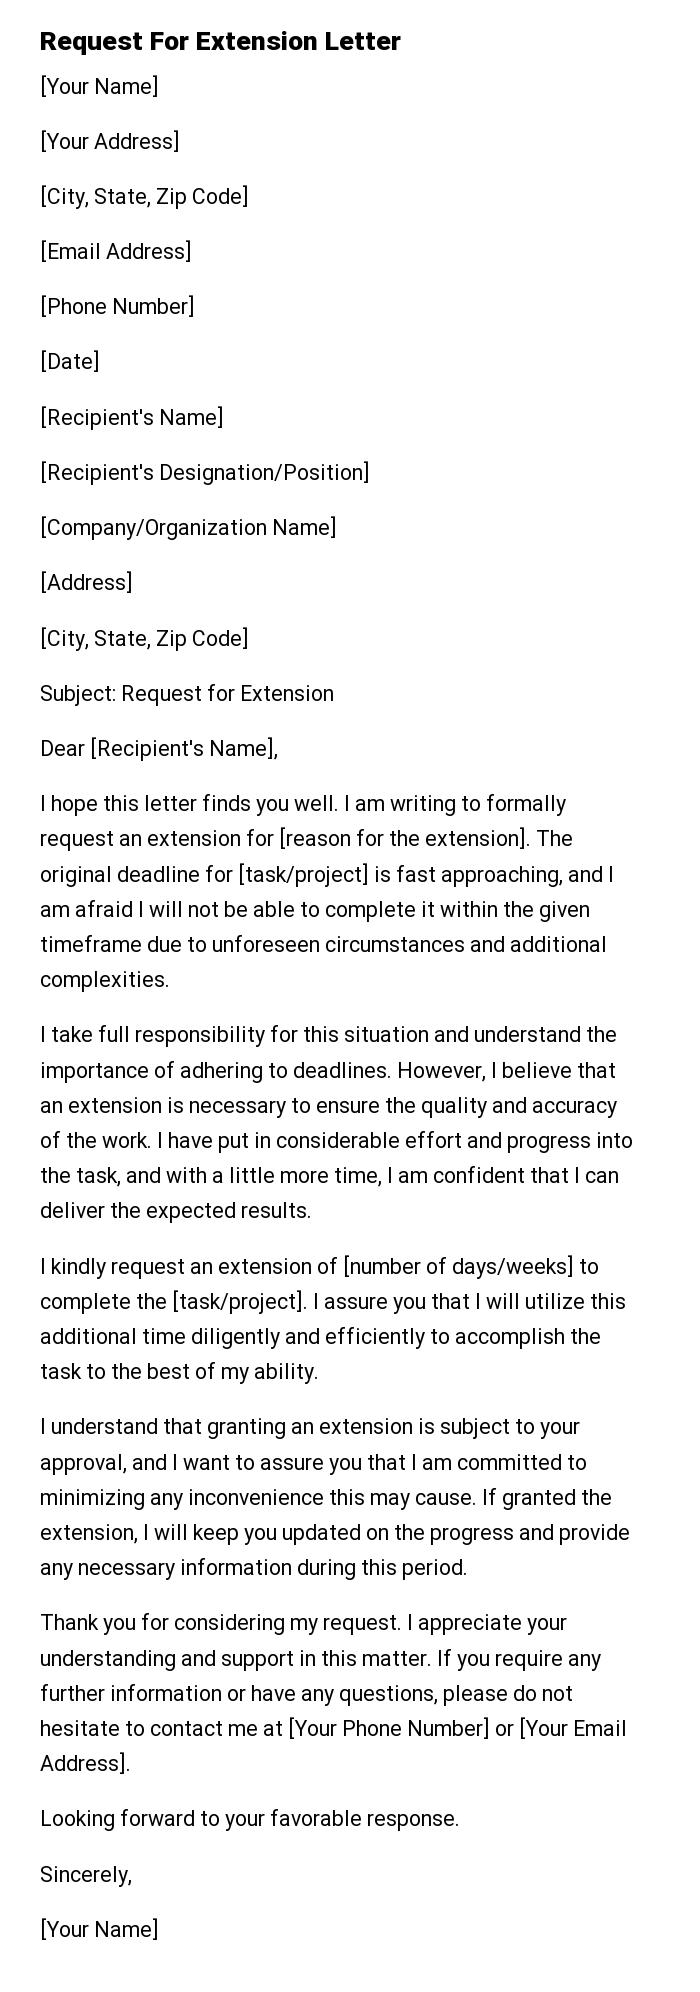 Request For Extension Letter